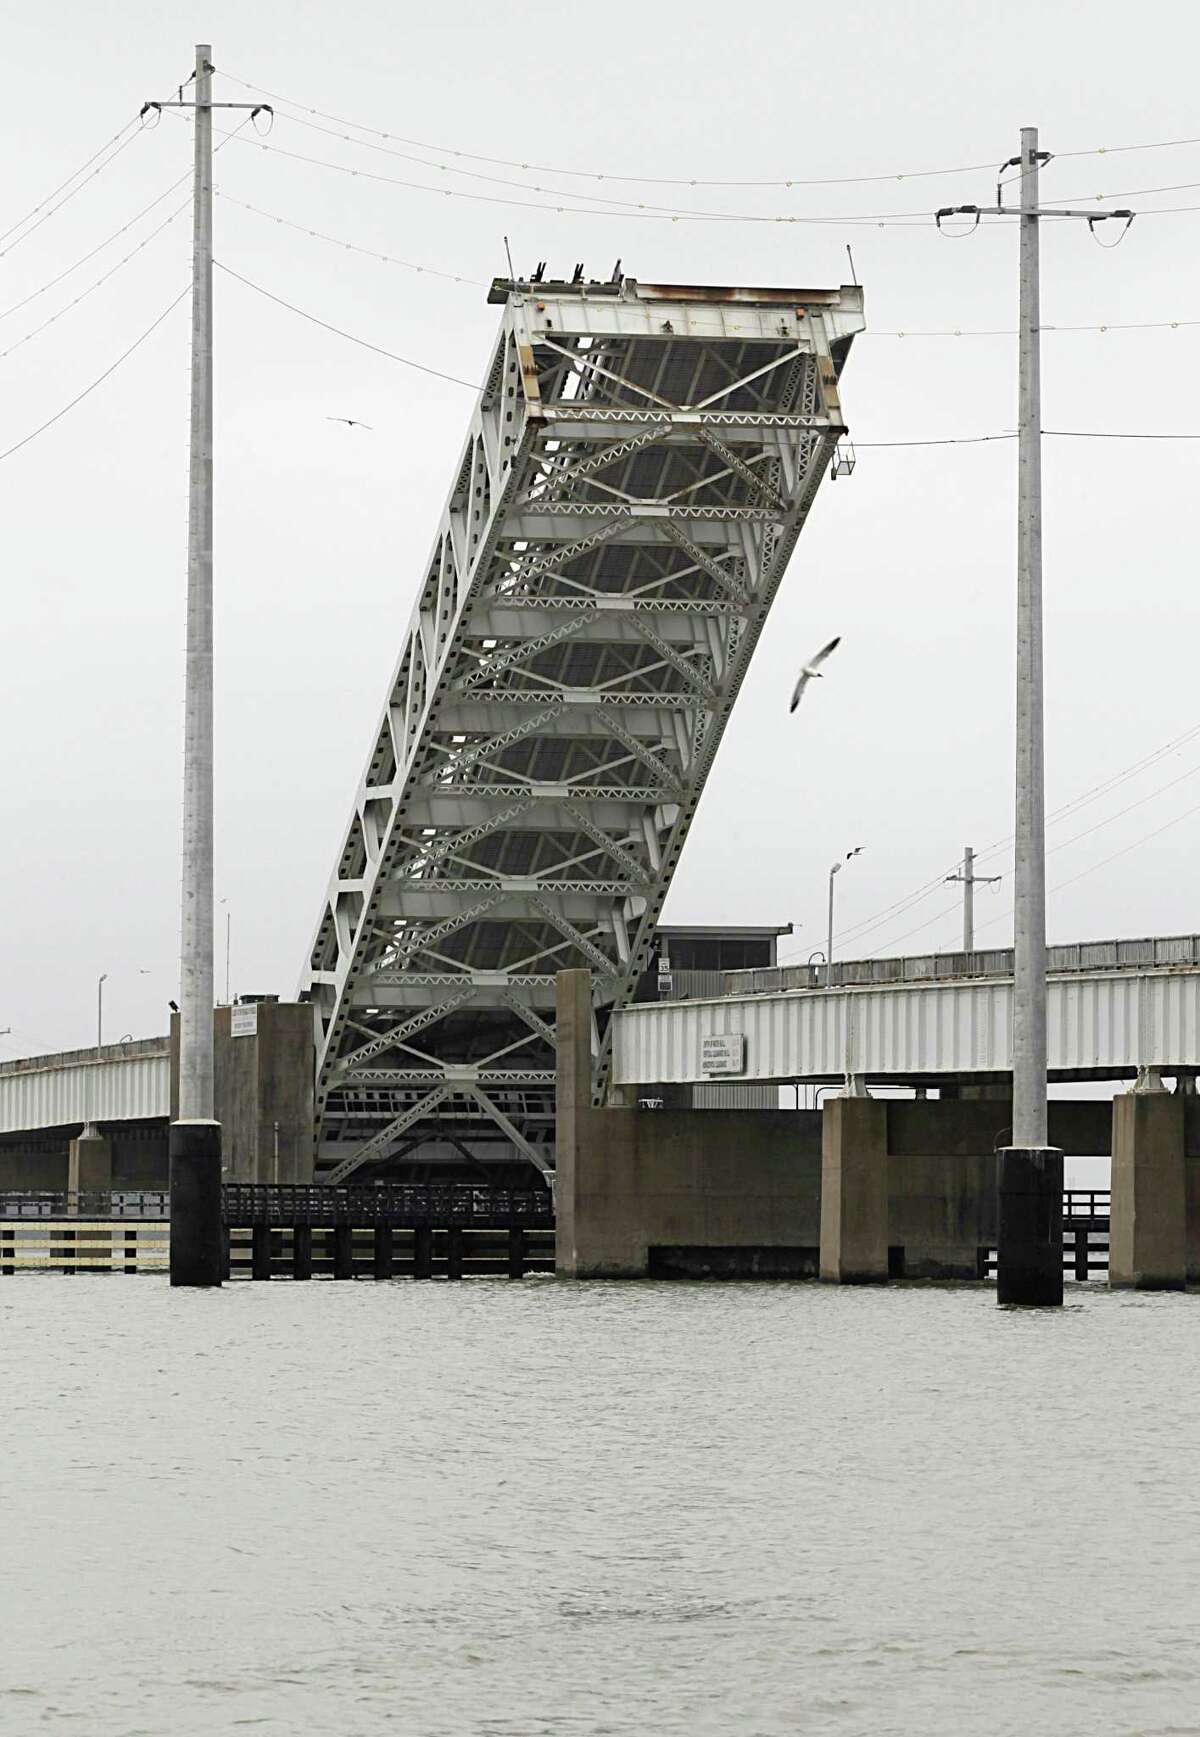 The drawbridge on the Pelican Island Causeway which connects Galveston to Pelican Island is shown here on April 28, 2016.